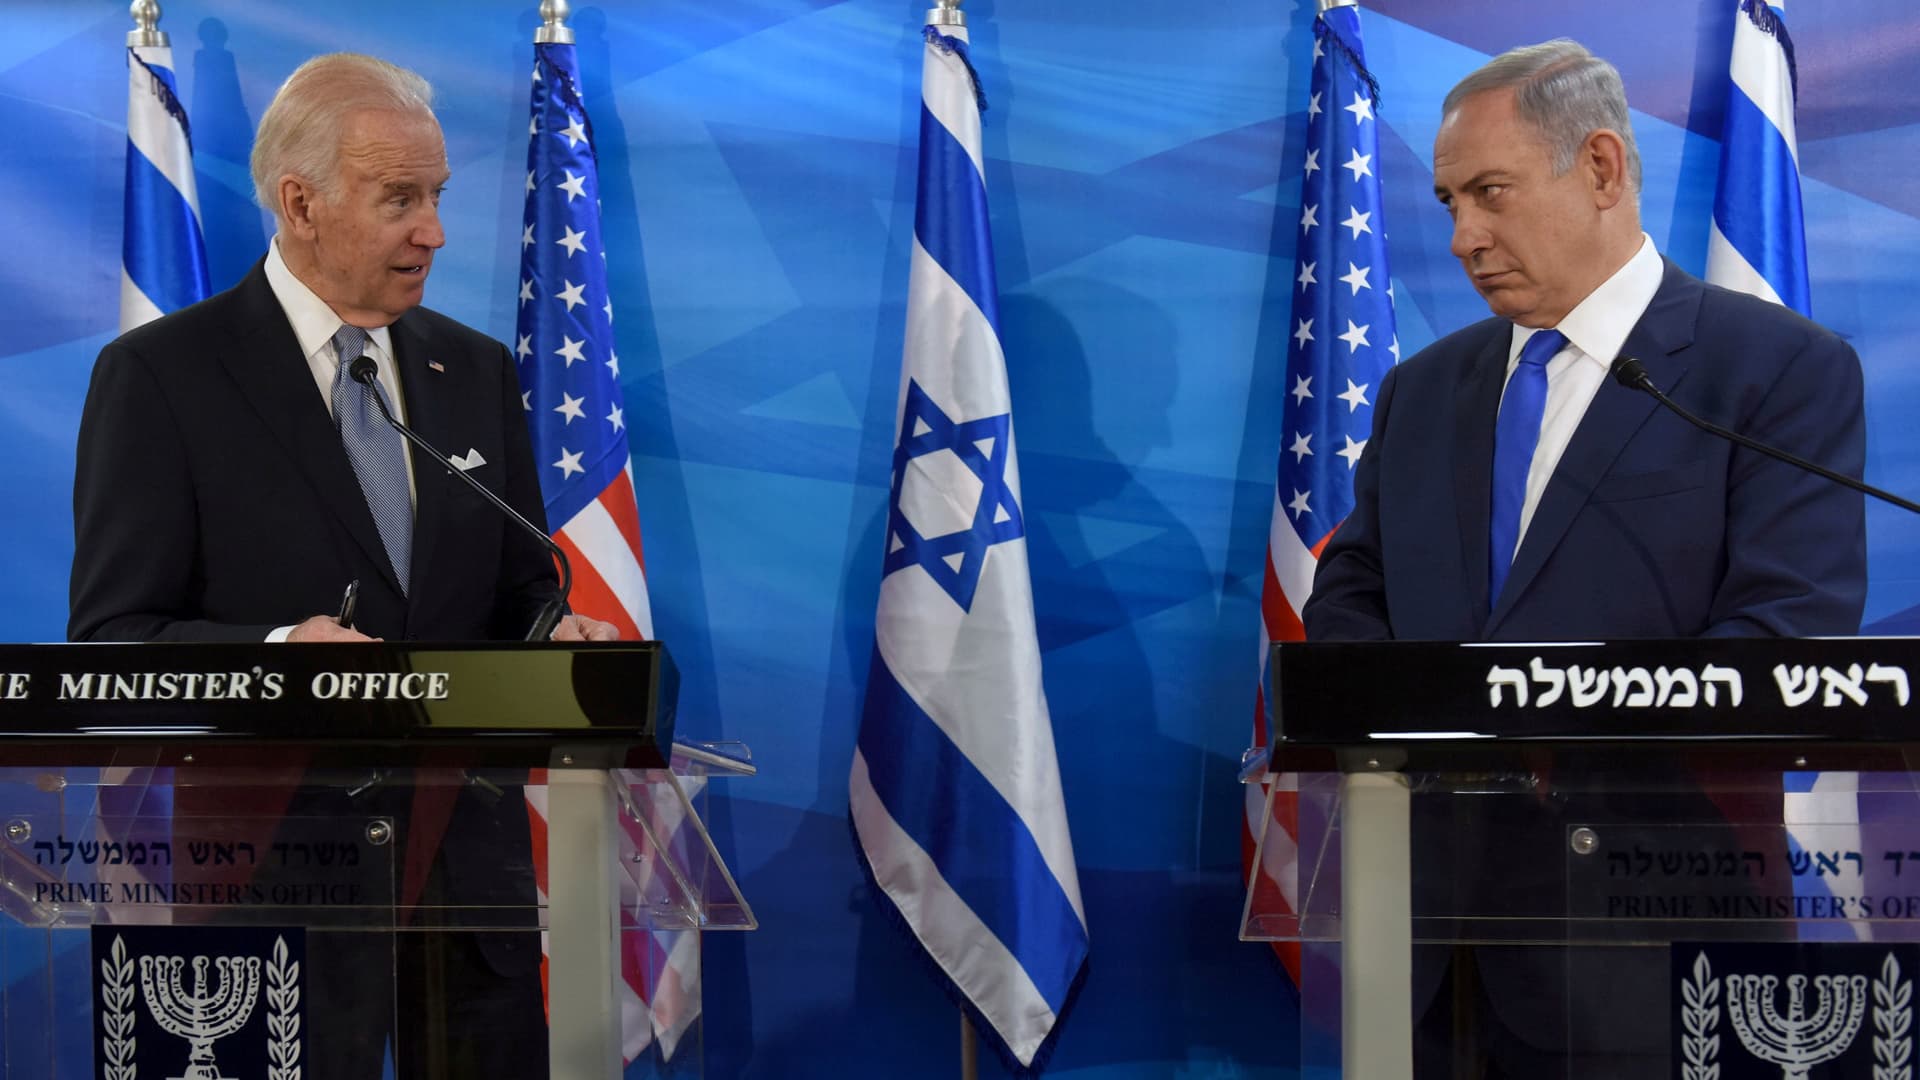 Biden and Netanyahu’s fraught relationship hits new low [Video]